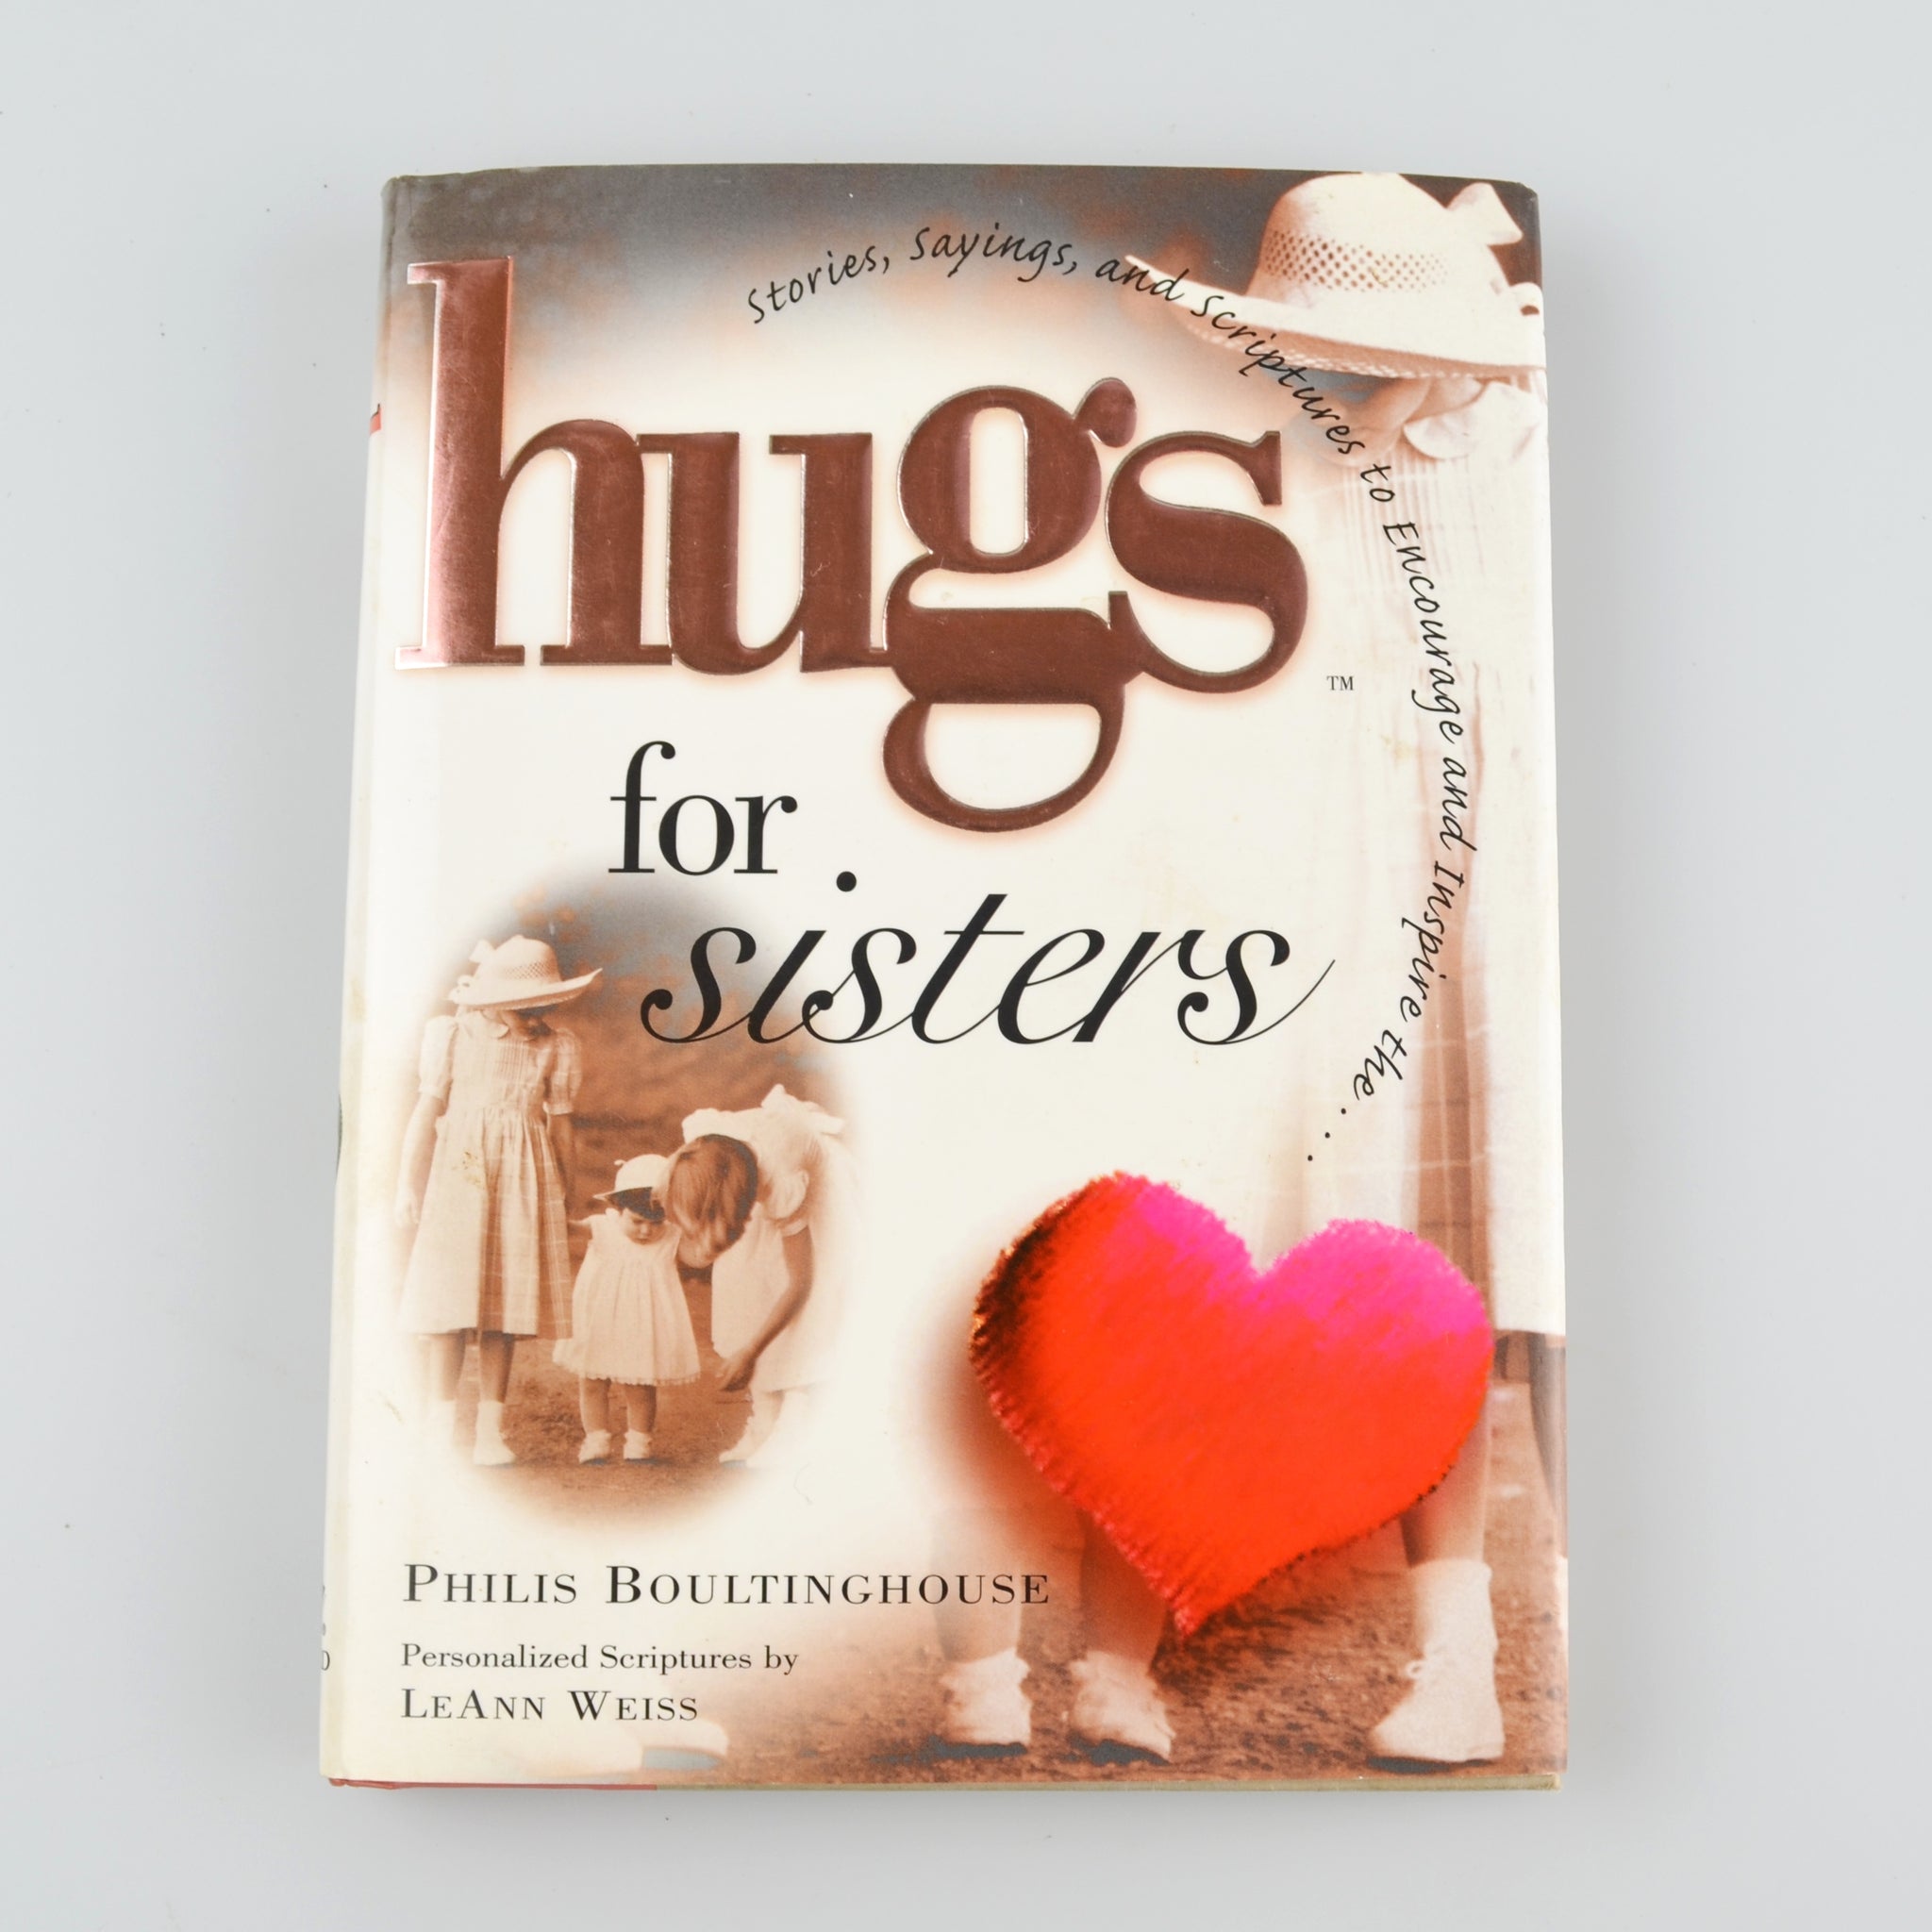 Hugs For Sisters by Philis Boultinghouse - Stories, Sayings, Scriptures To Encourage